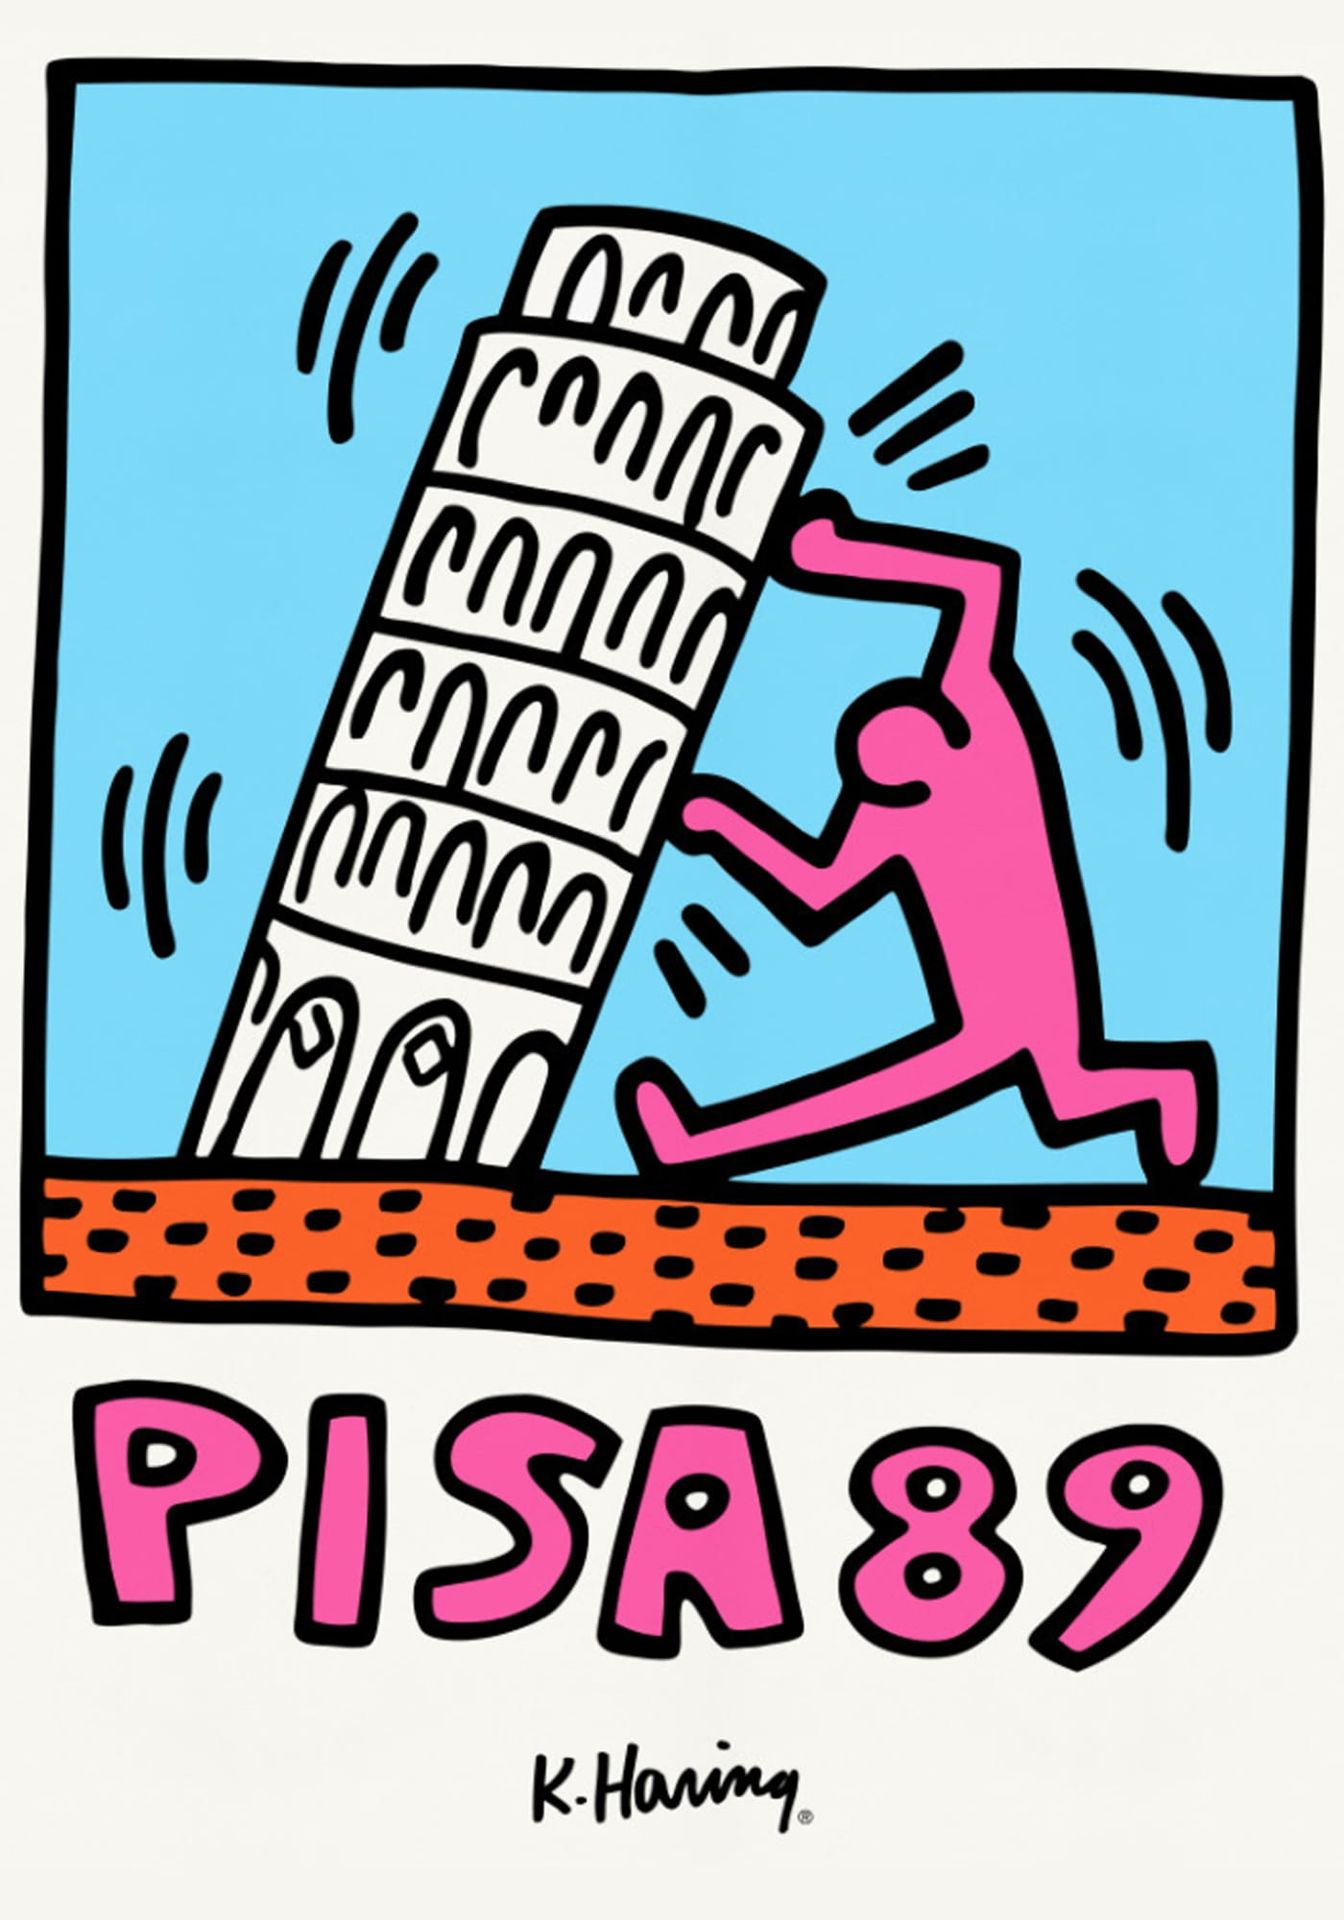 Null Keith Haring (after), Poster Pisa, 1989

Poster paper, Dimension 39 x 53 cm&hellip;